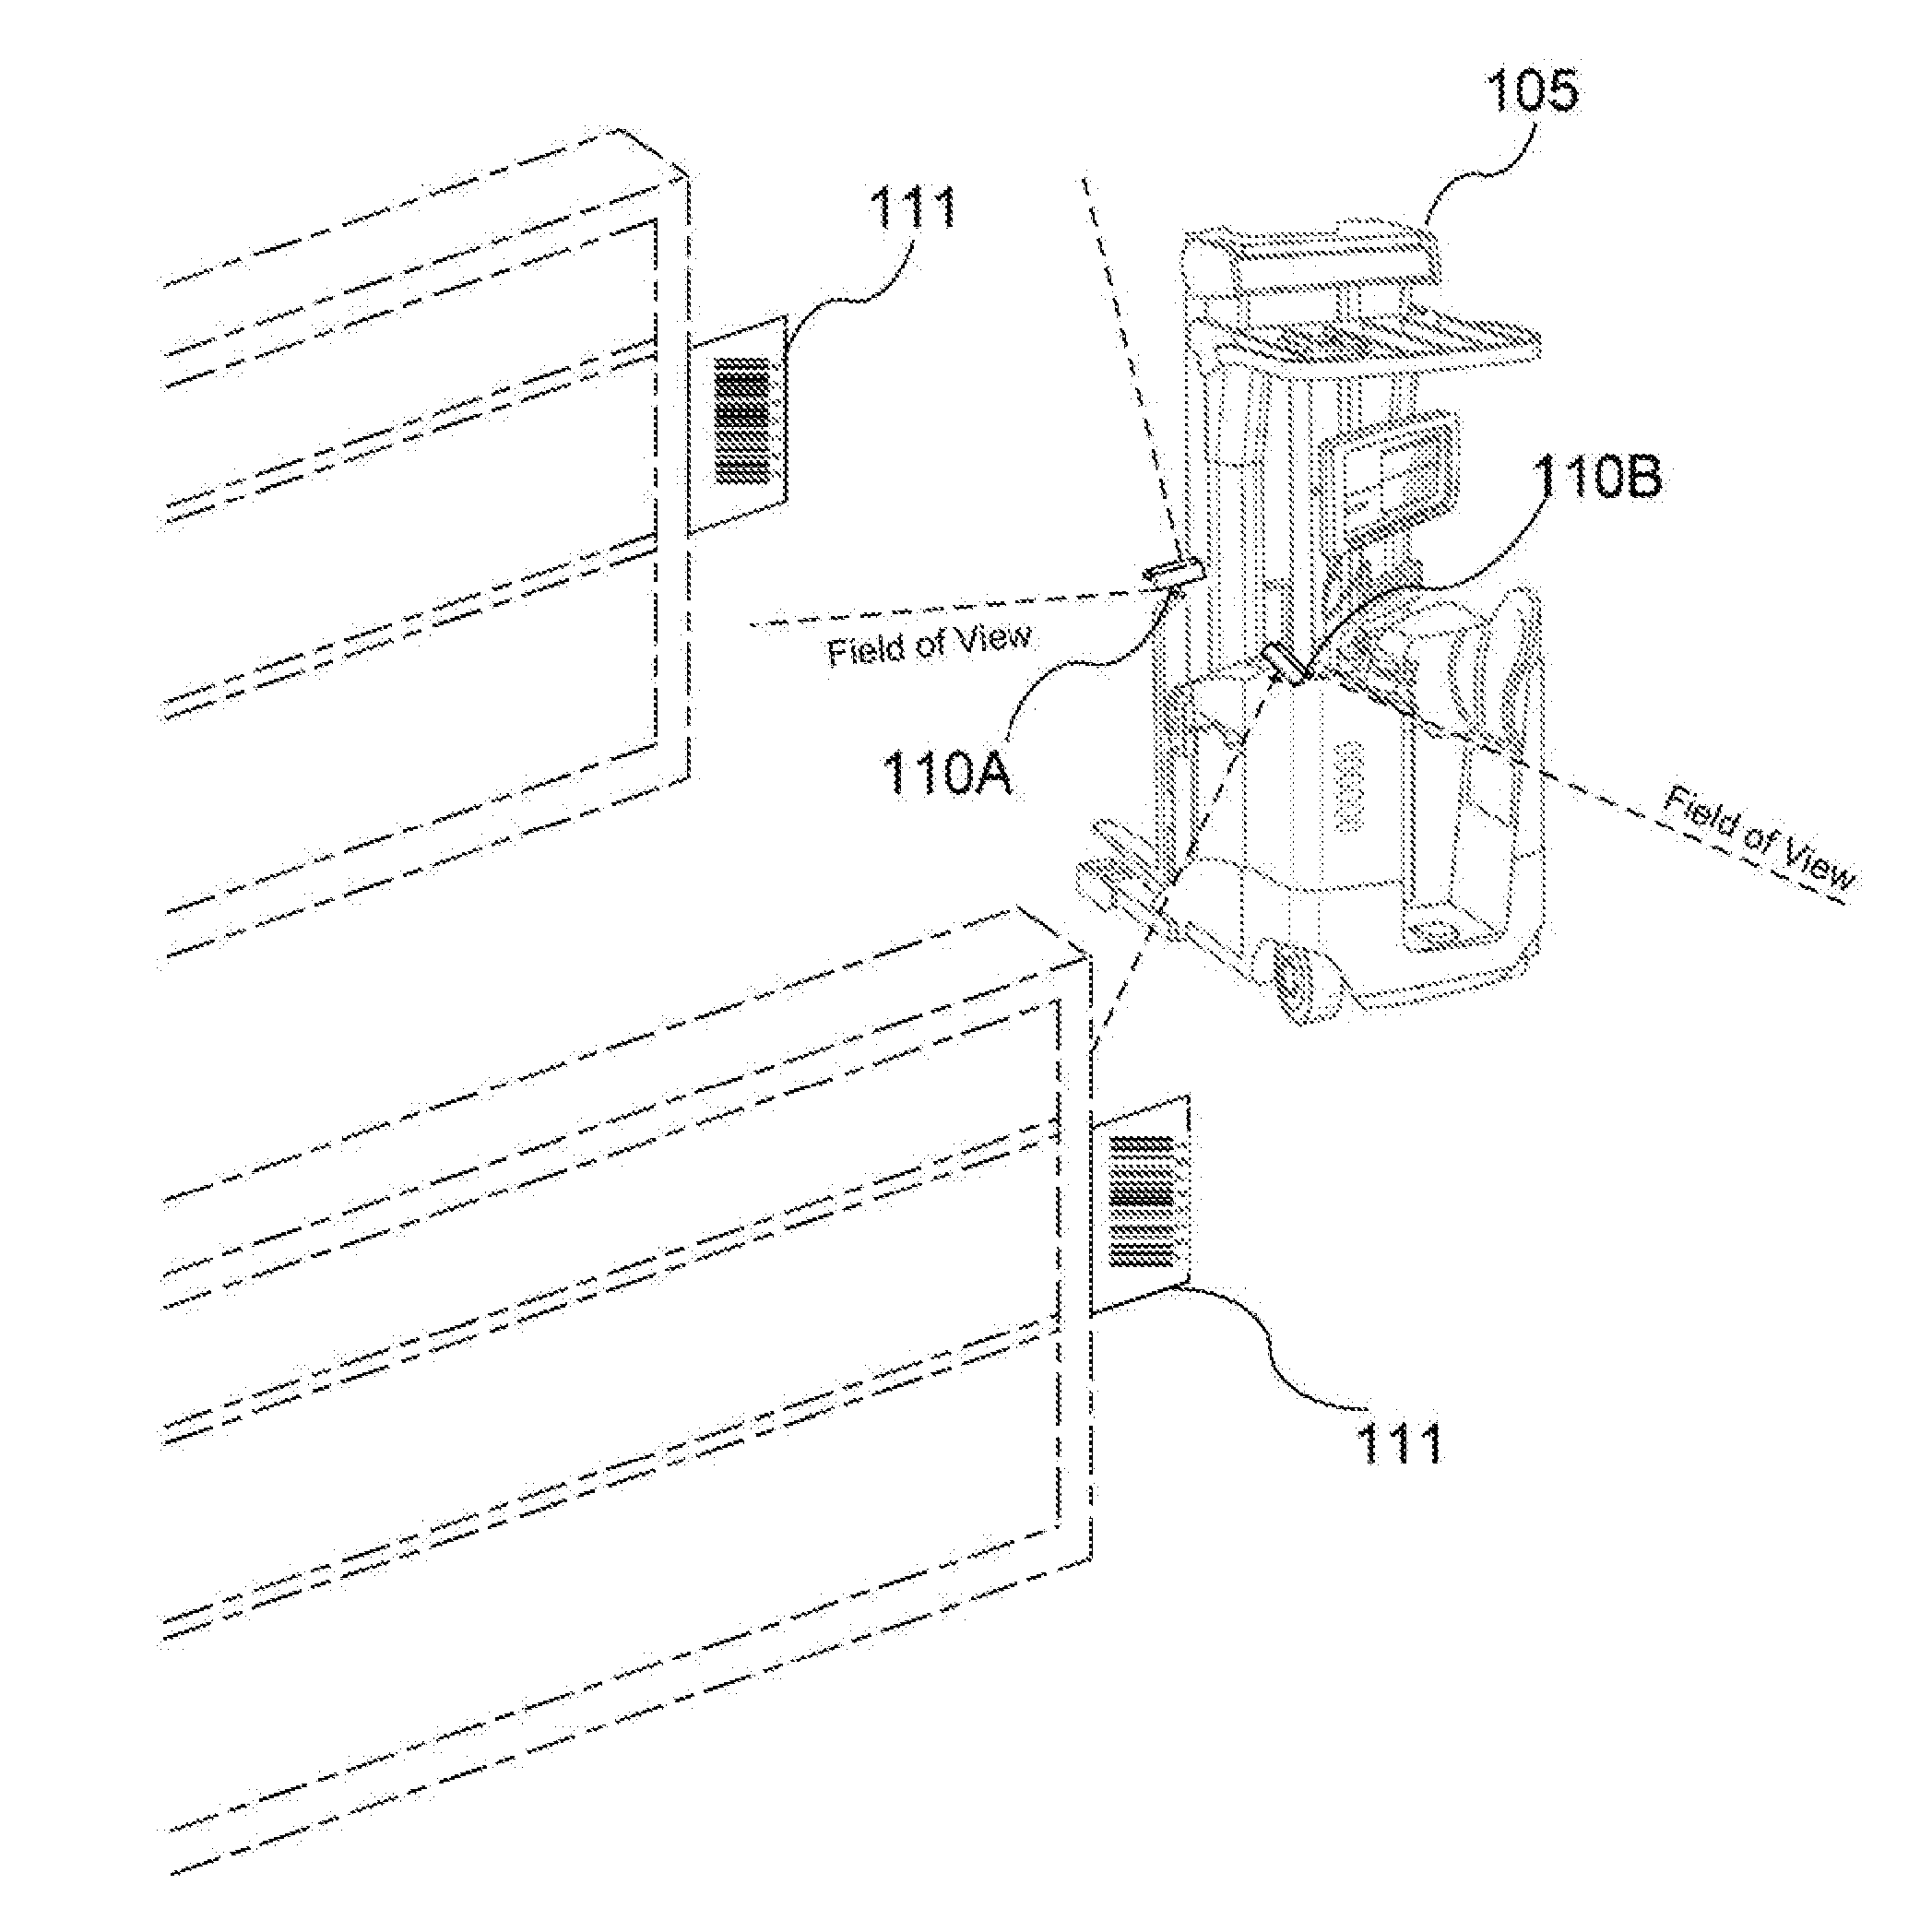 Industrial vehicle positioning system and method